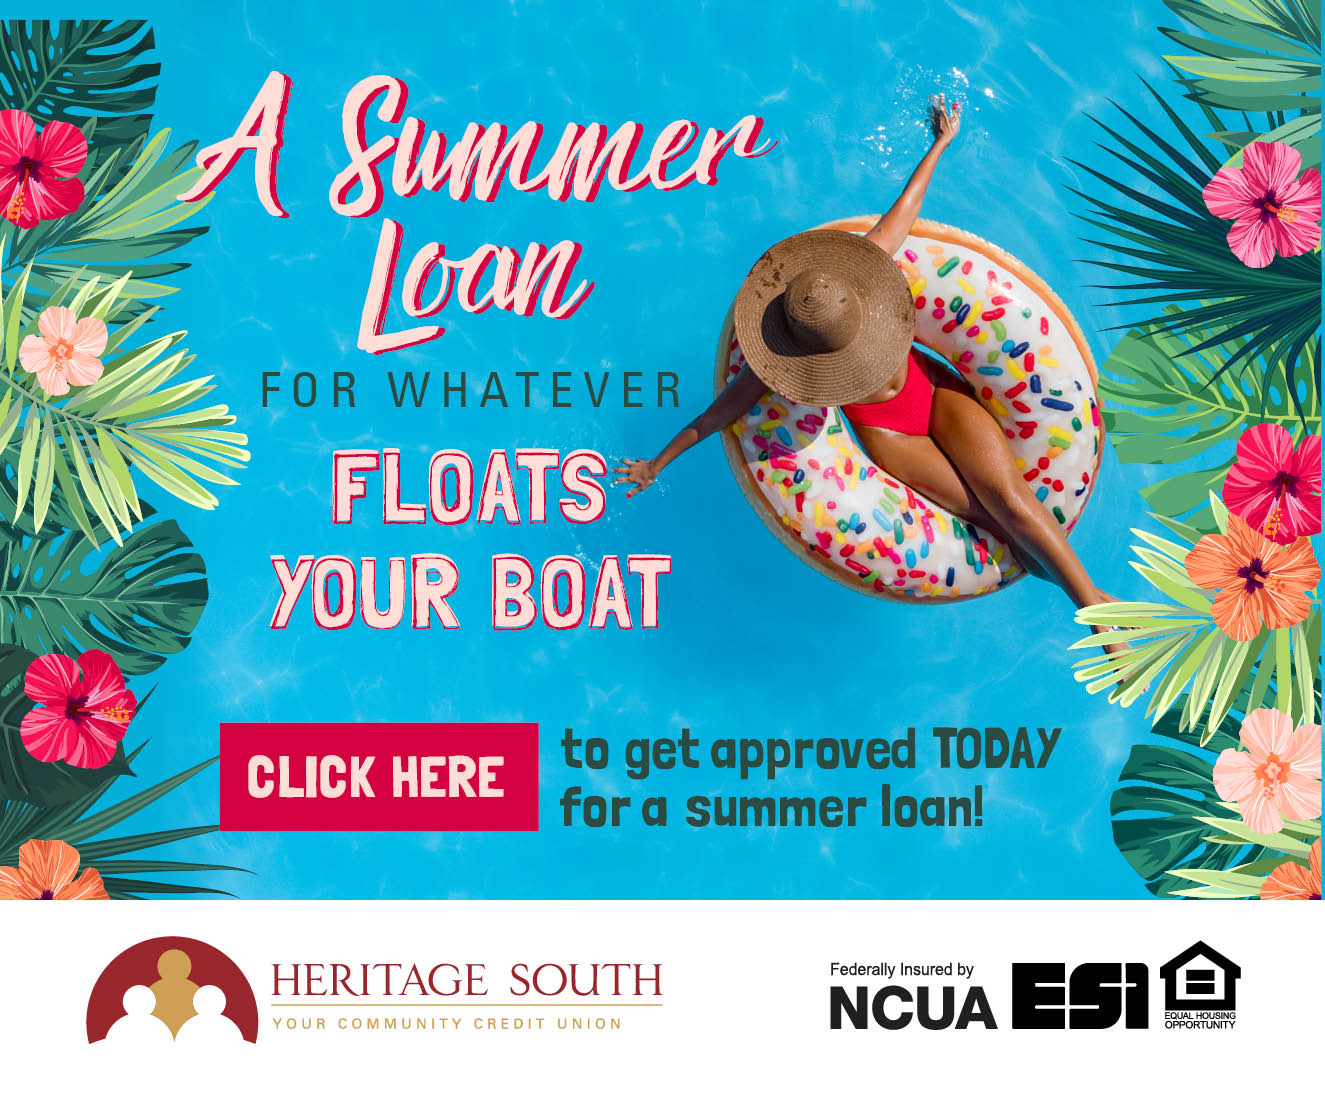 A Summer Loan for Whatever Floats Your Boat. Click Here to get approved today for a summer loan! Heritage South Your Community Credit Union. Federally Insured by NCUA.  Equal Housing Opportunity.